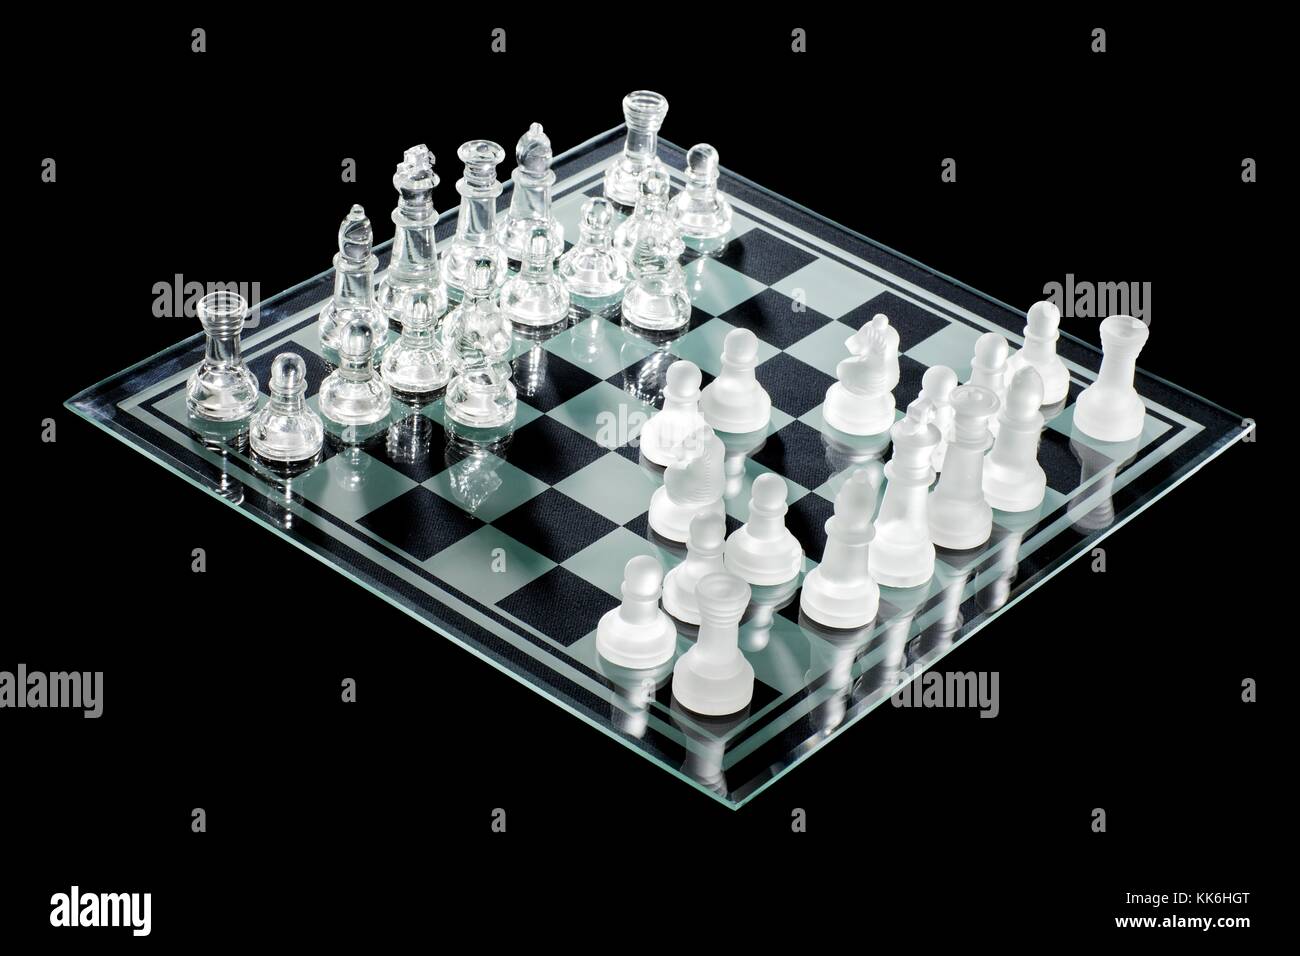 set of glass chess pieces on chess board Stock Photo - Alamy